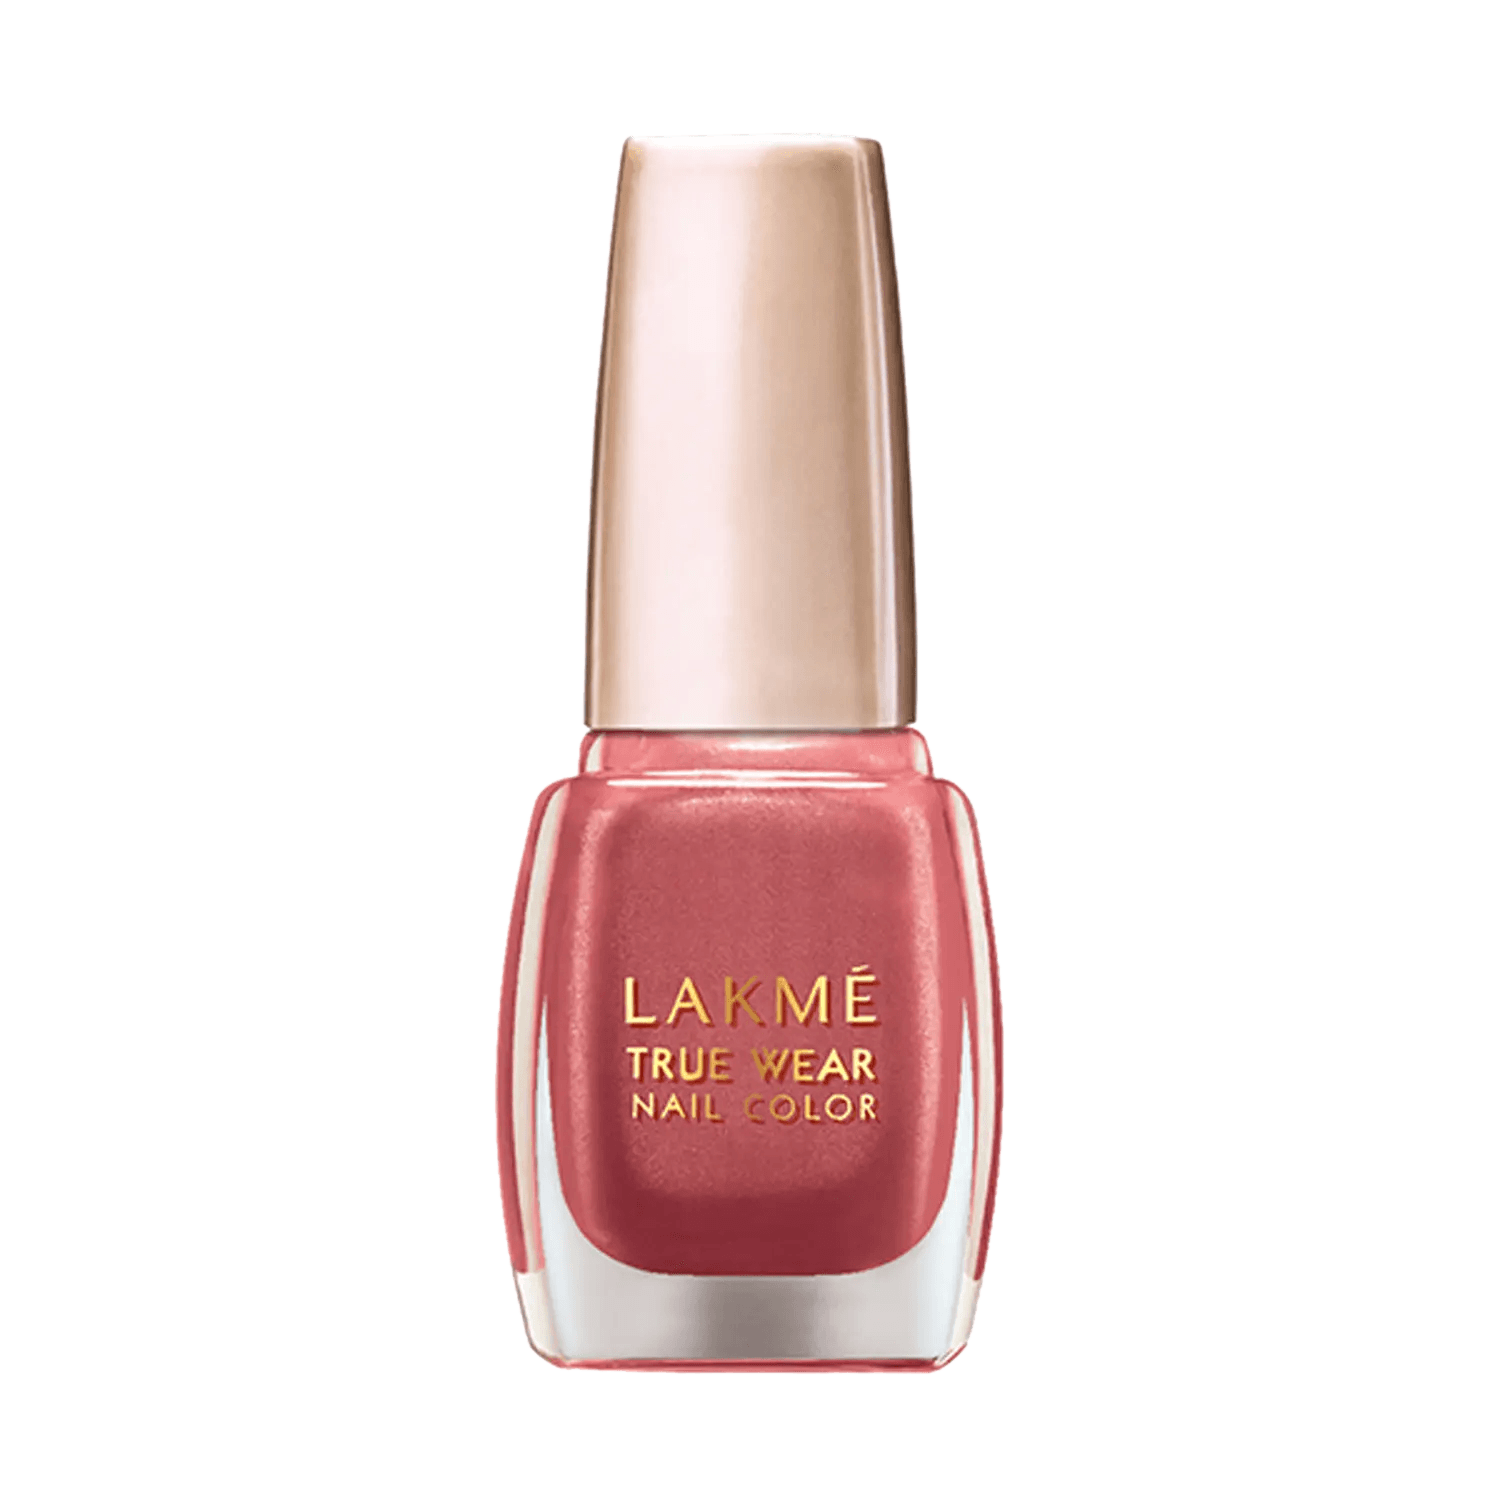 Buy Lakmé True Wear Nail Colour, 9ml Online at Low Prices in India -  Amazon.in